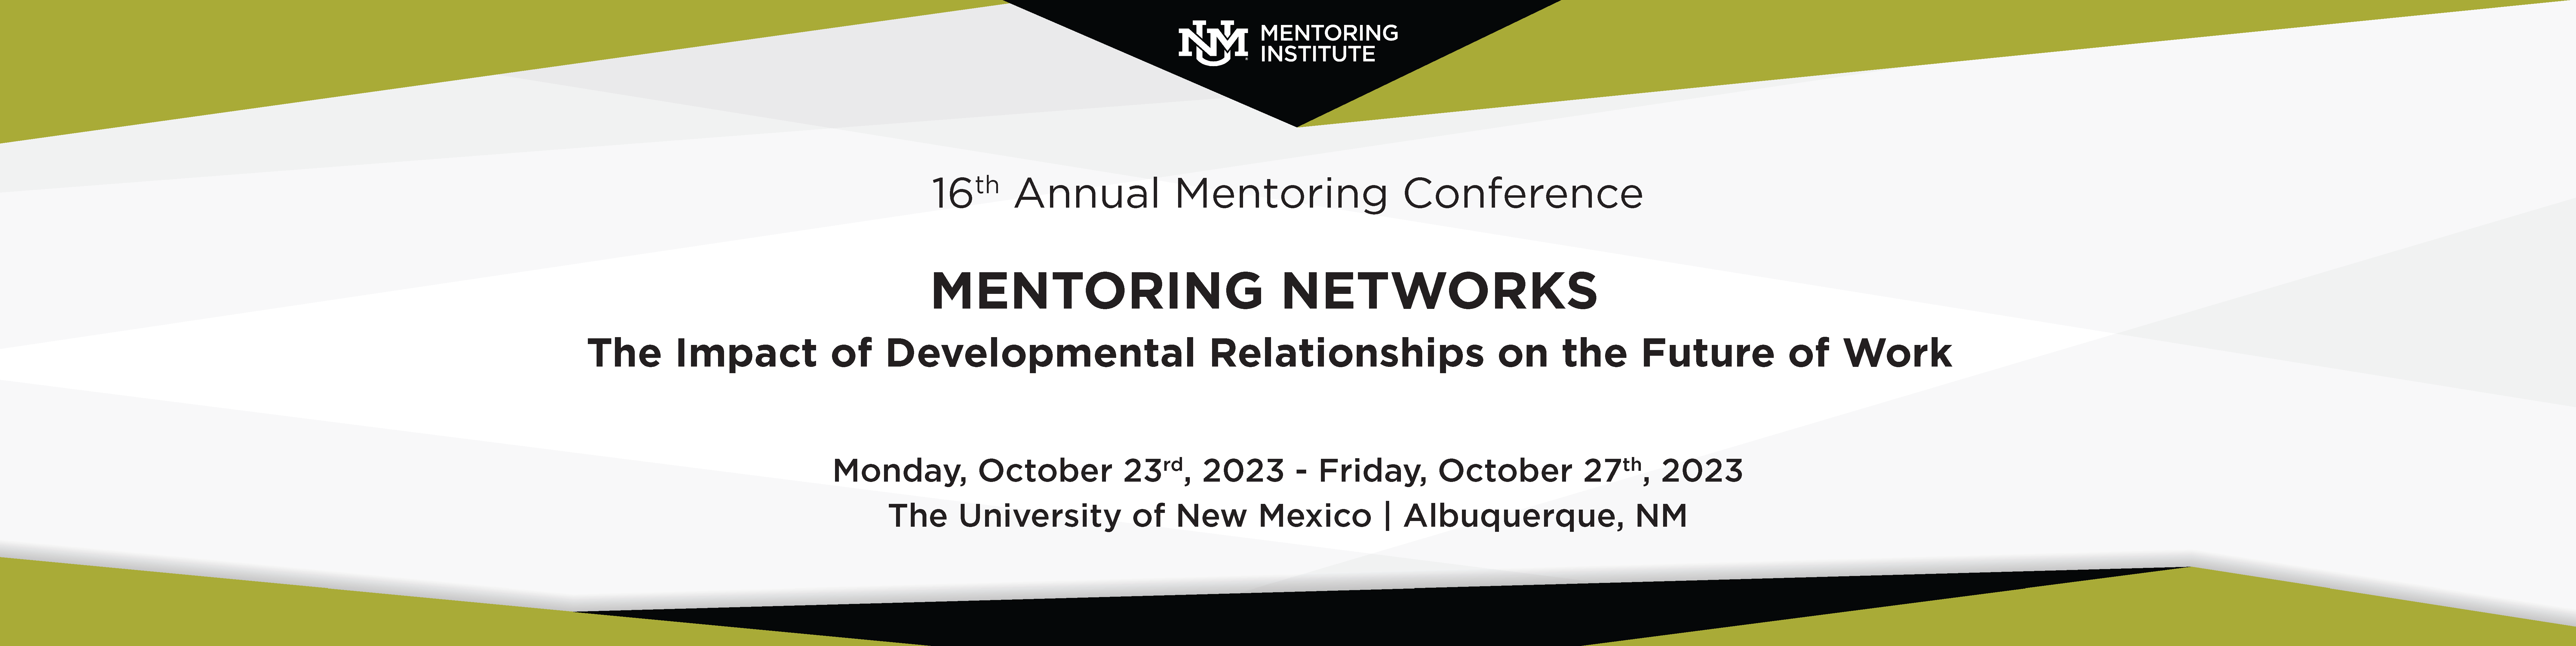 2022 Mentoring Conference